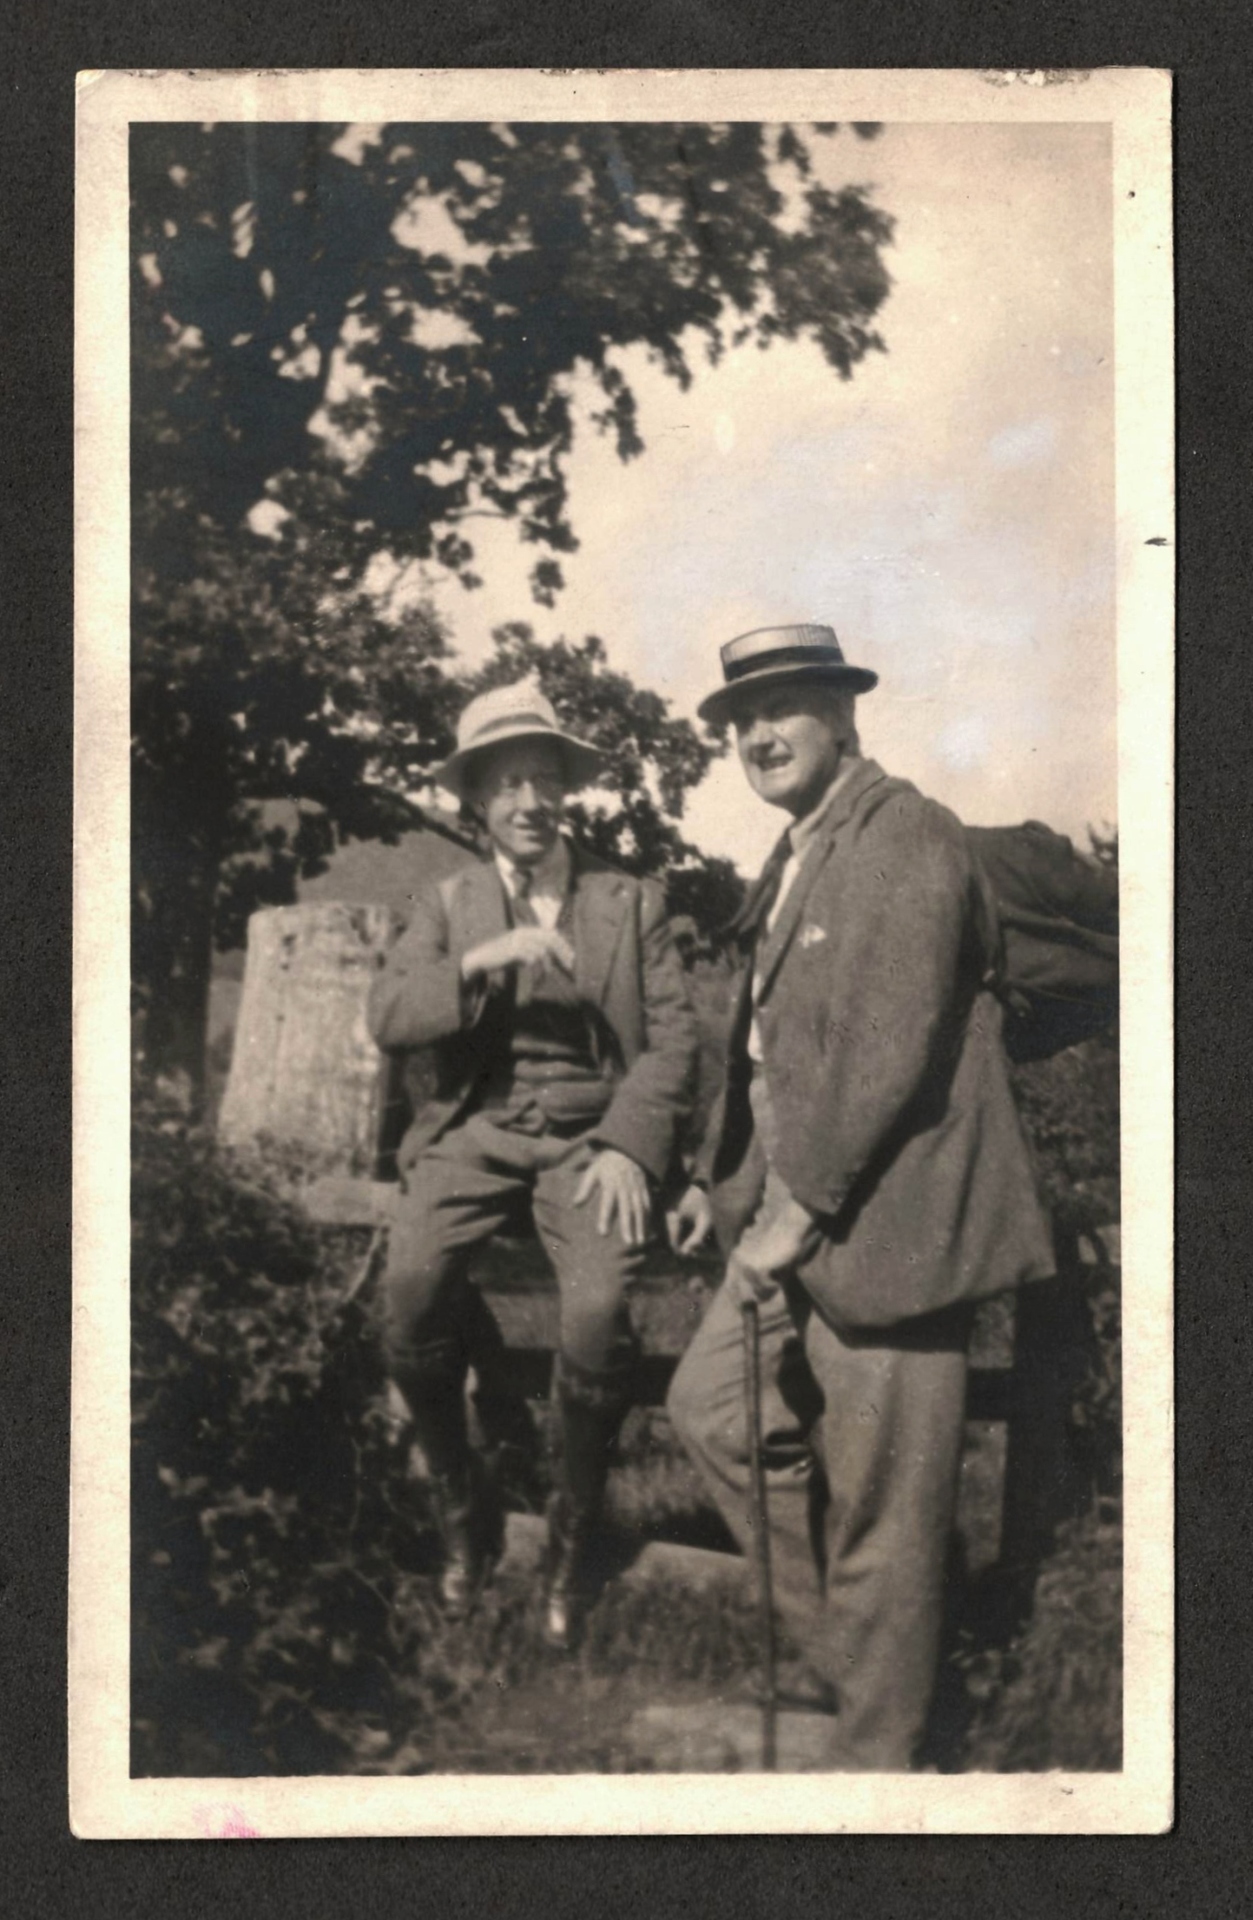 A photograph of Holst and Vaughan Williams in the countryside